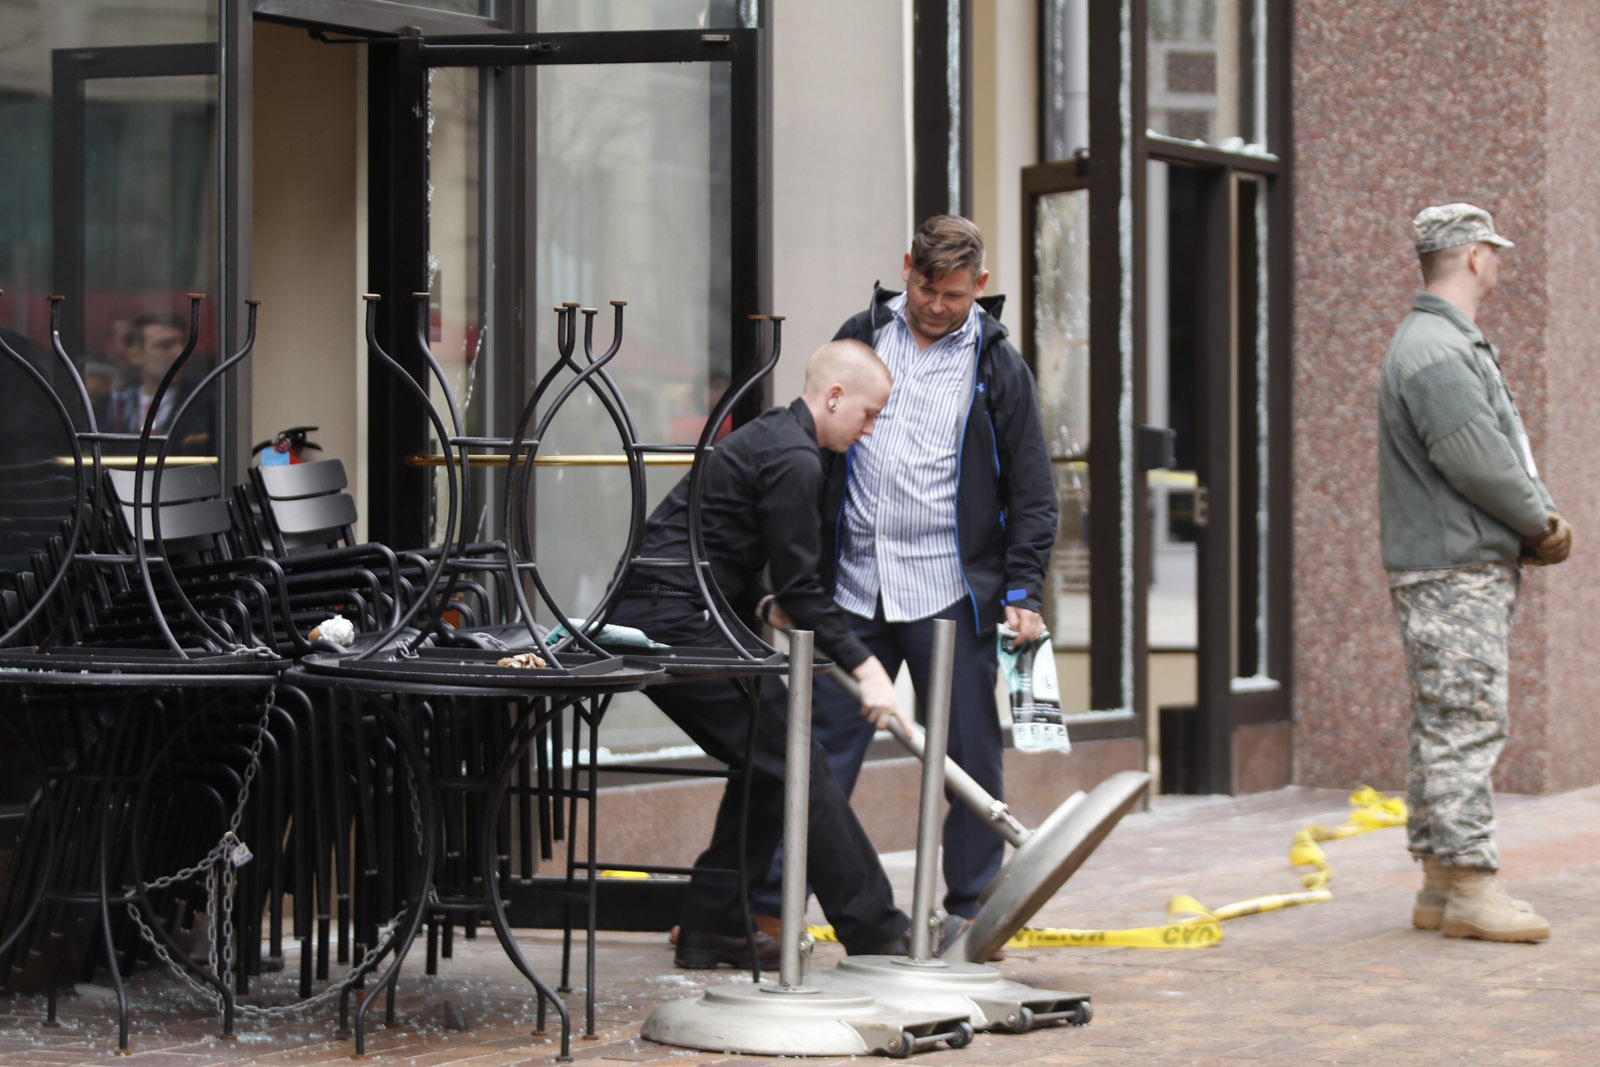 Workers clean up broken glass at a Starbucks at 12th and I streets NW. Protesters vandalized several businesses near Franklin Square just before Donald Trump's inauguration ceremony was about to begin. Police said they arrested numerous protesters who are charged with rioting. (WTOP/Kate Ryan)